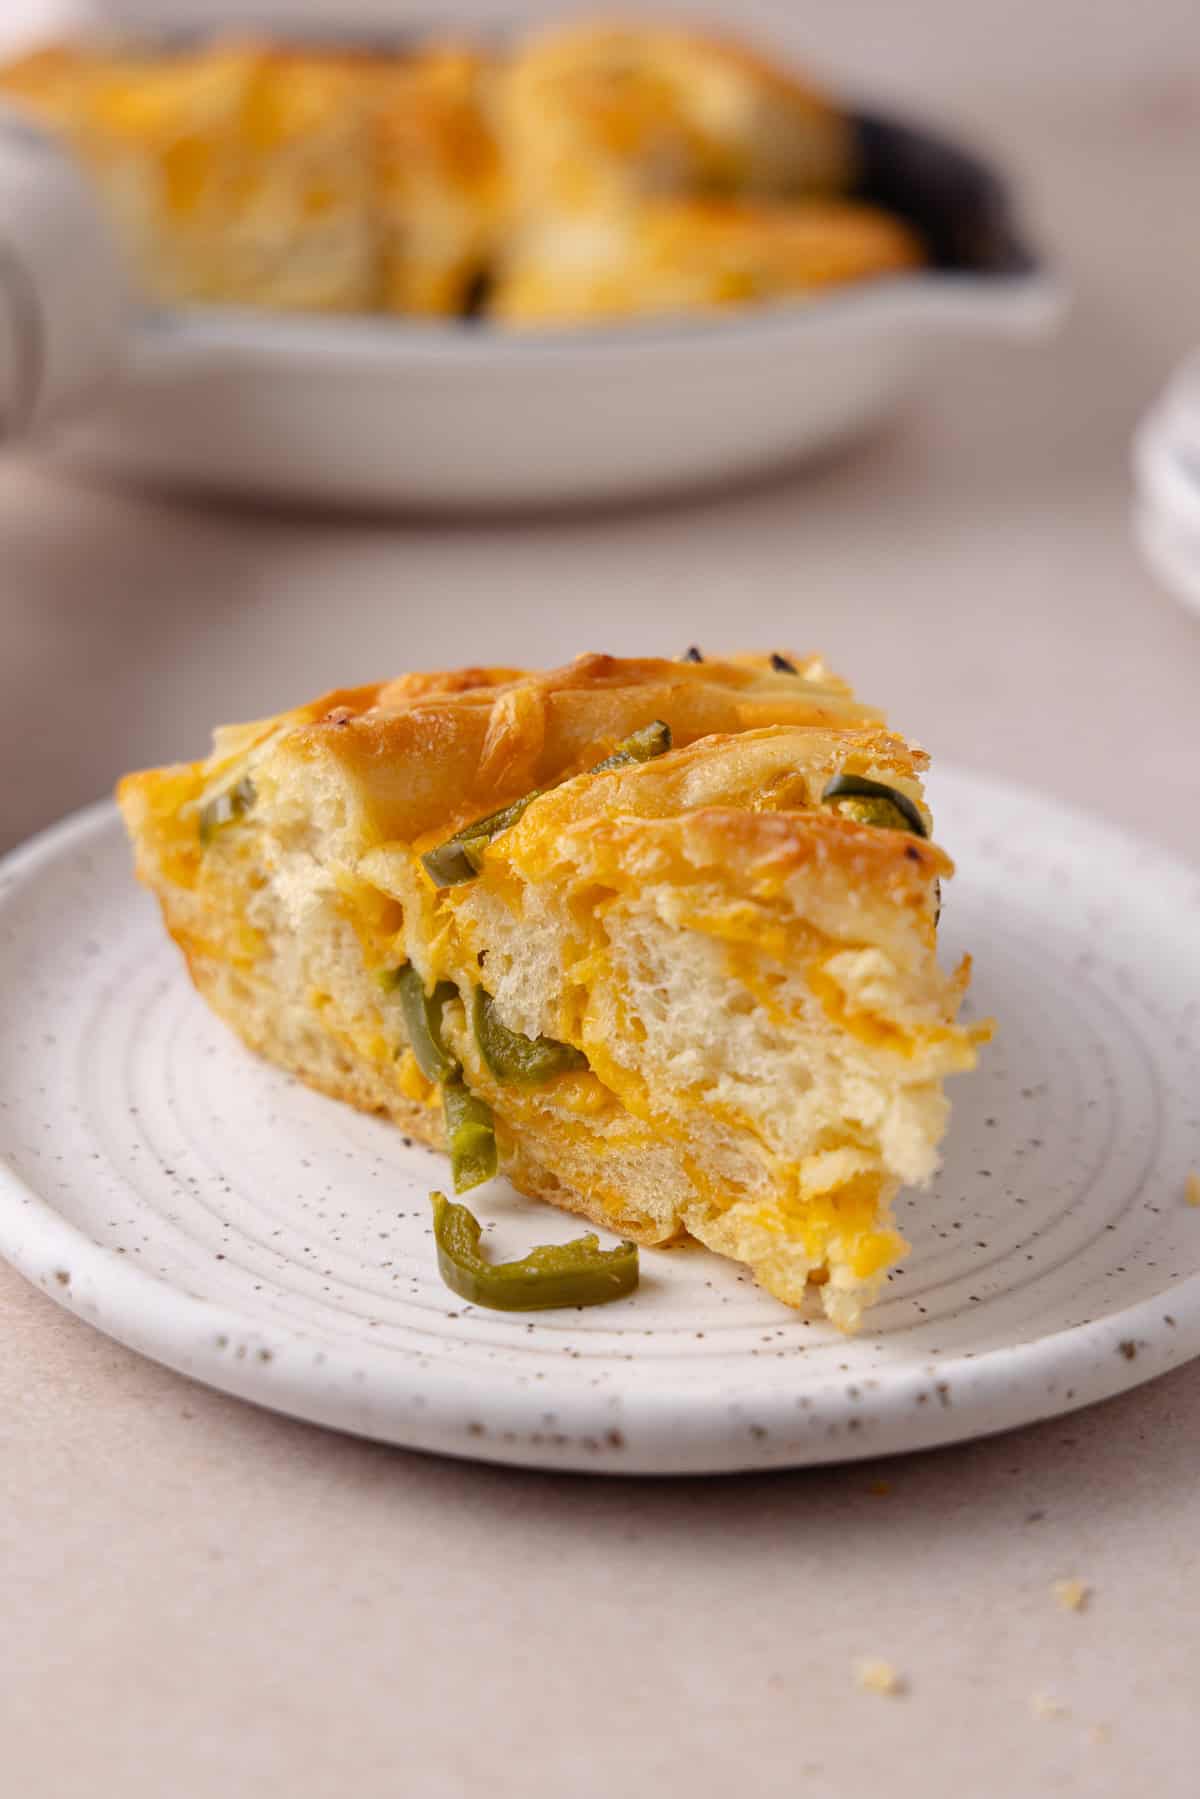 A piece on Jalapeno cheddar twist bread on a small plate.